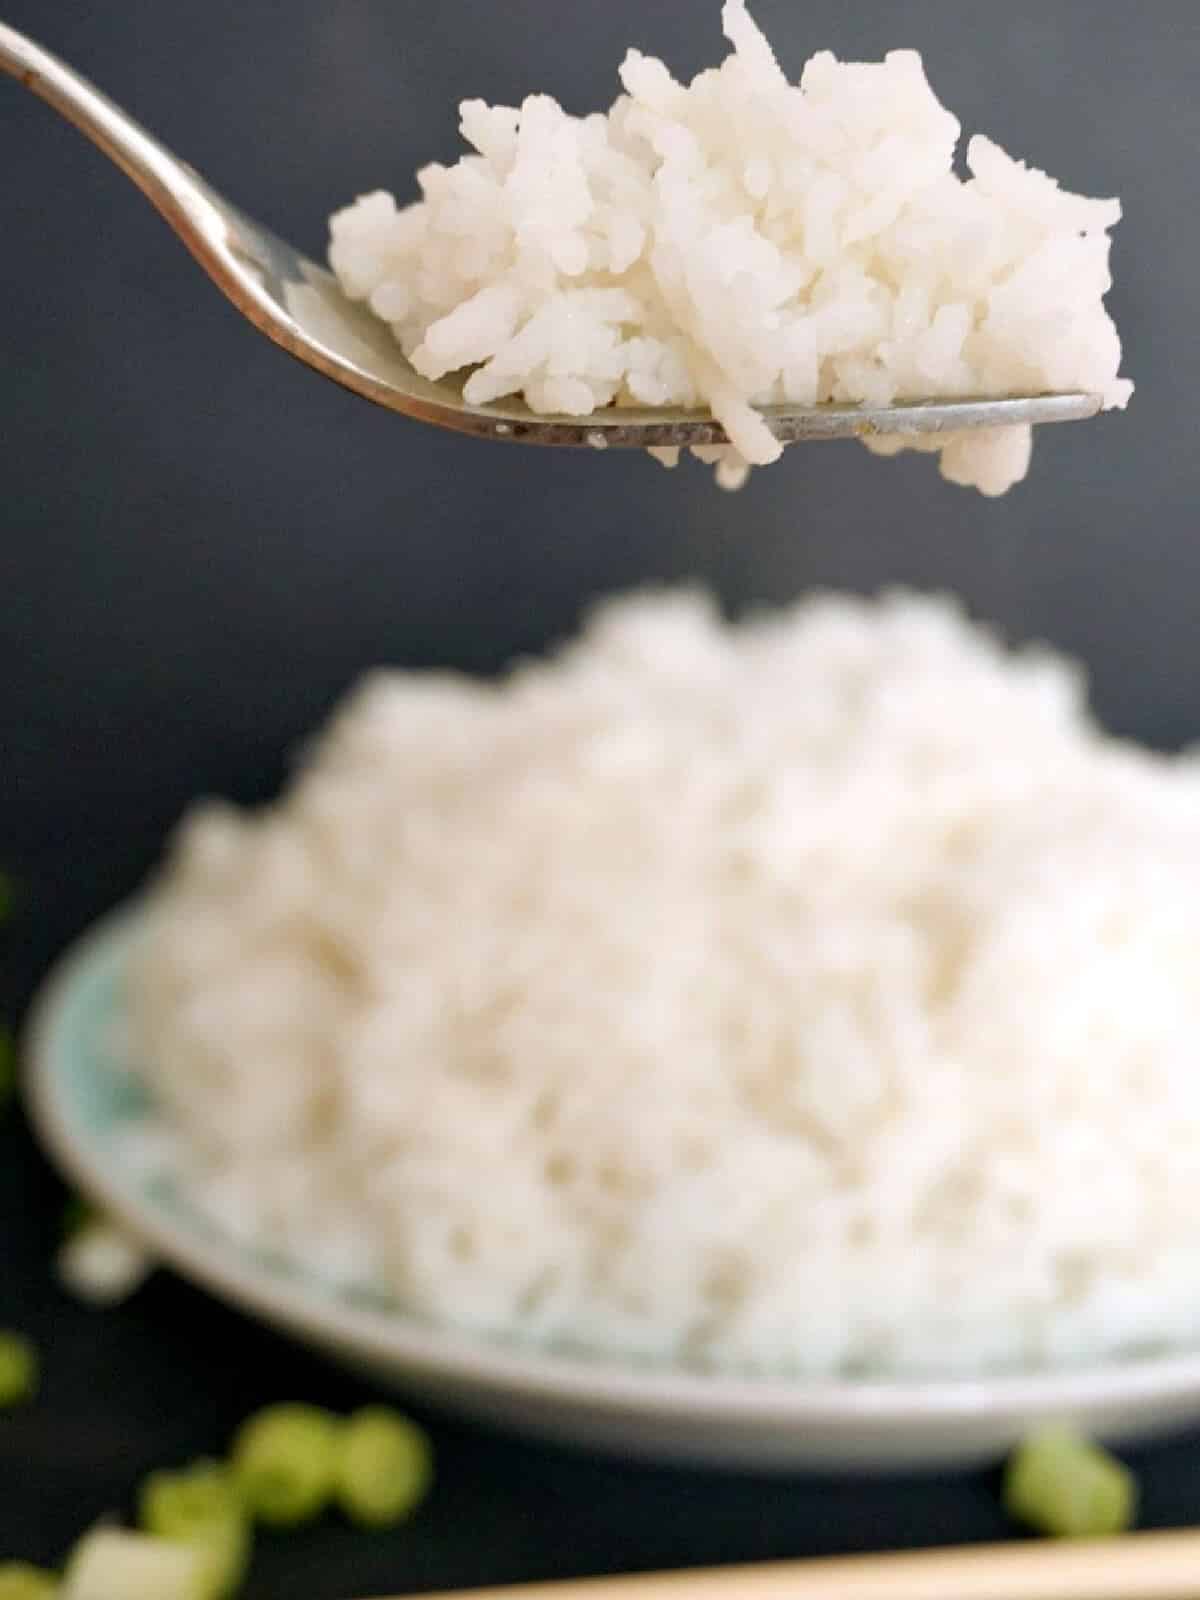 A forkful of basmati rice with a plate with more rice in the background.